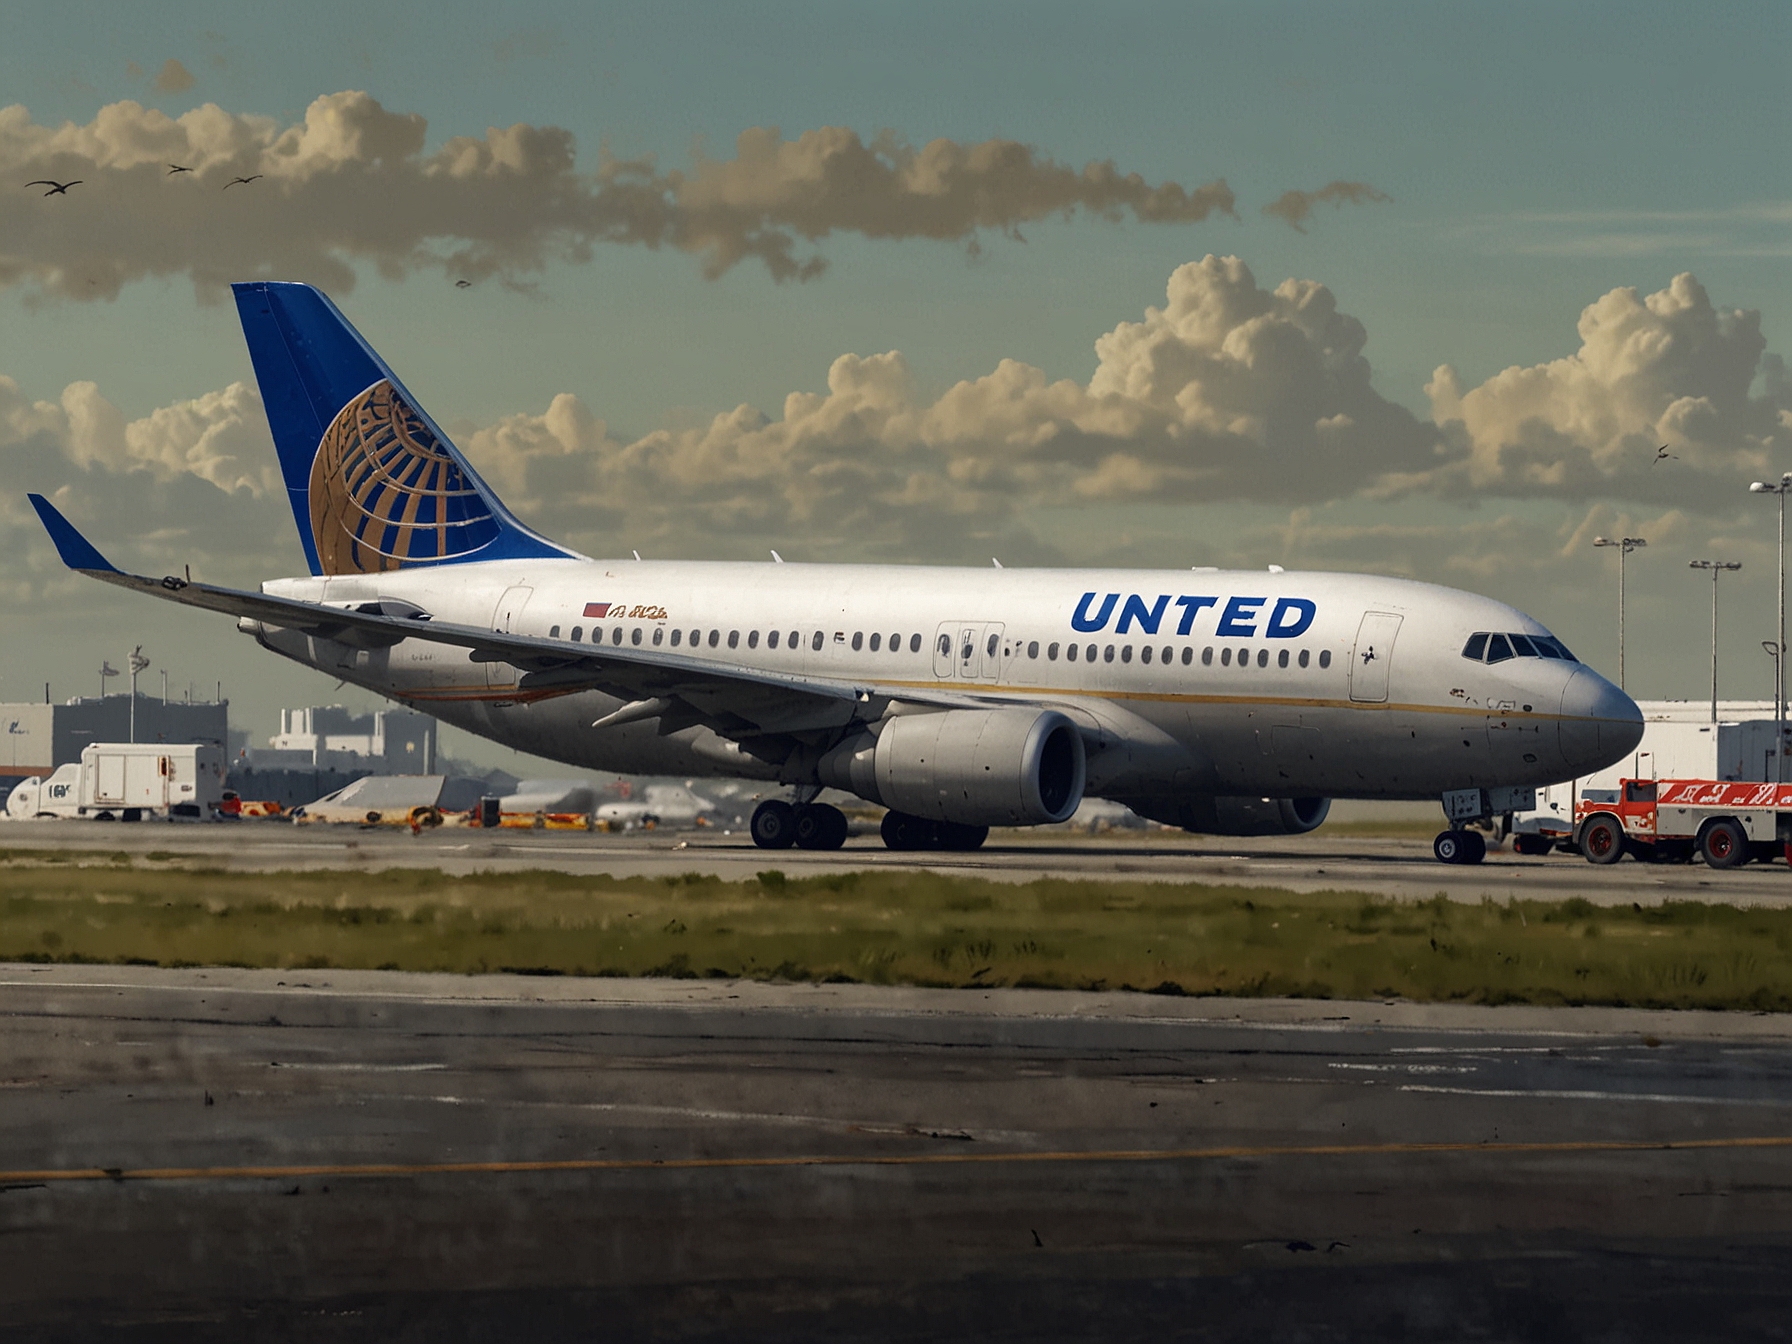 A United Airlines aircraft on the runway, surrounded by emergency vehicles, shortly after an unexpected return due to the loss of an engine liner piece mid-flight.